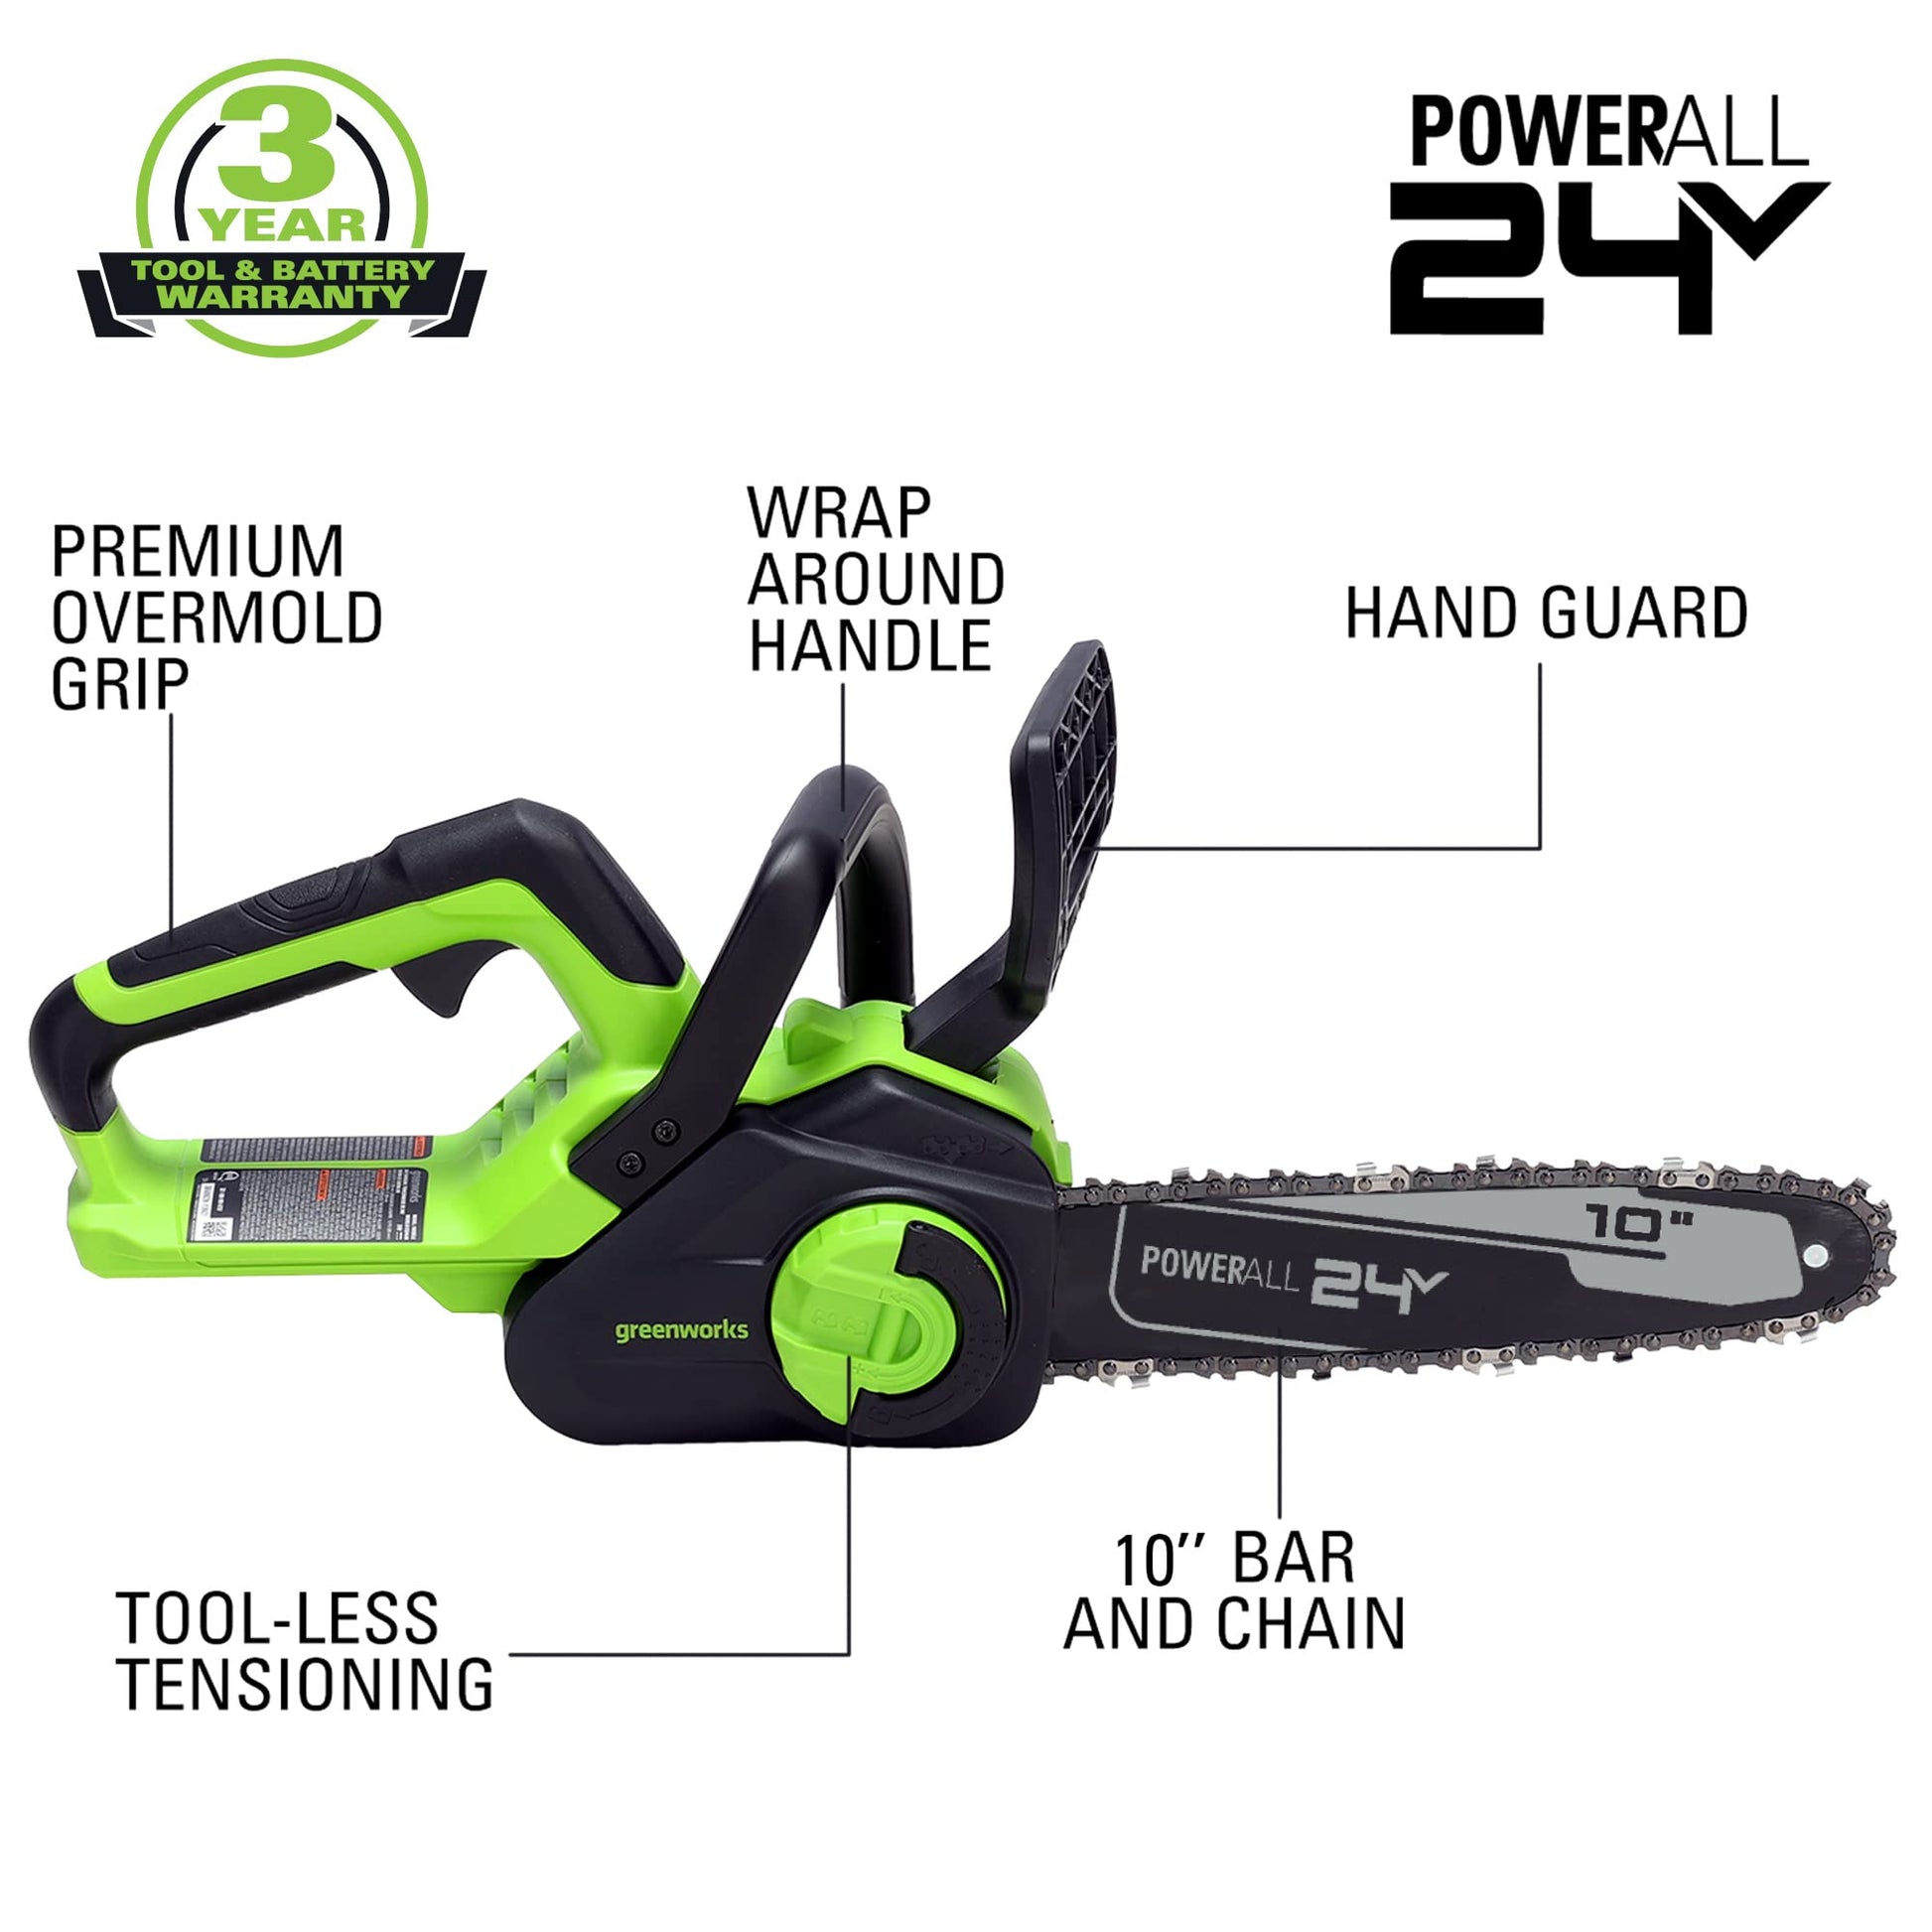 24V 10 Chainsaw, USB Battery, & Charger